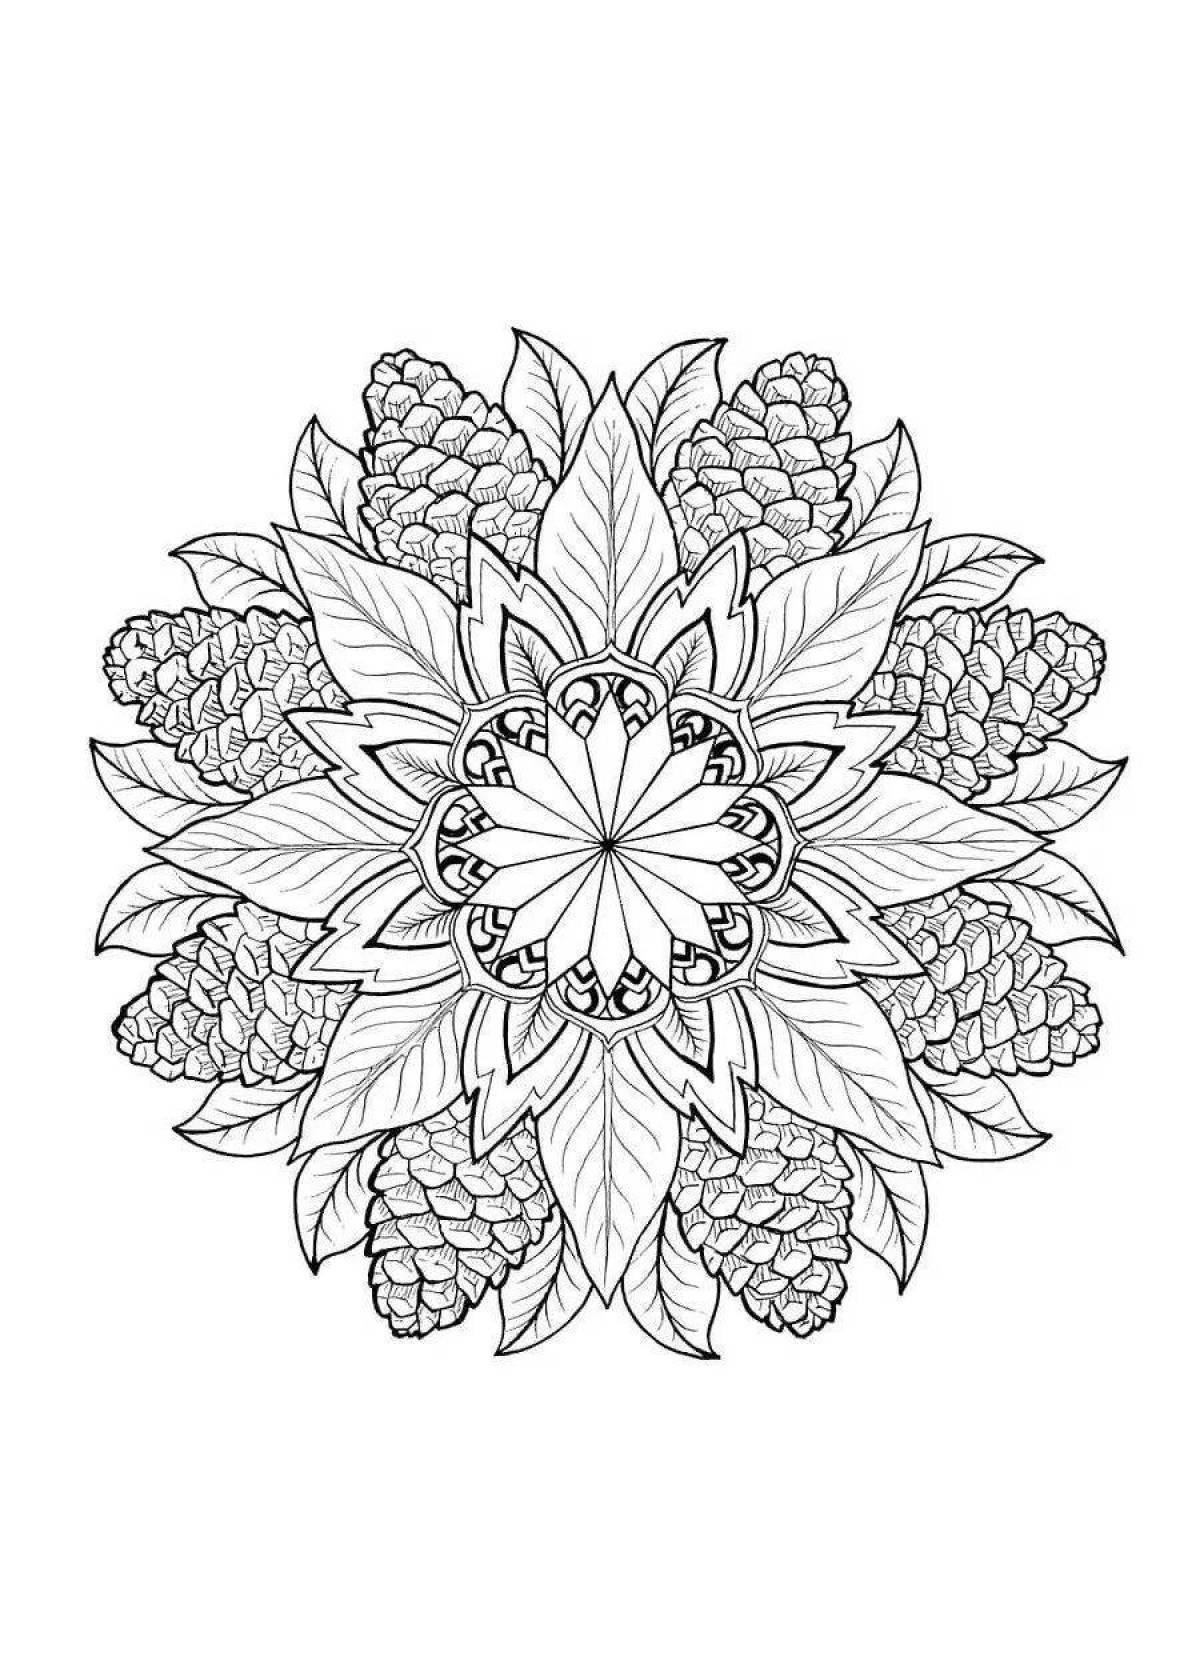 Dazzling coloring book for all adult mandalas